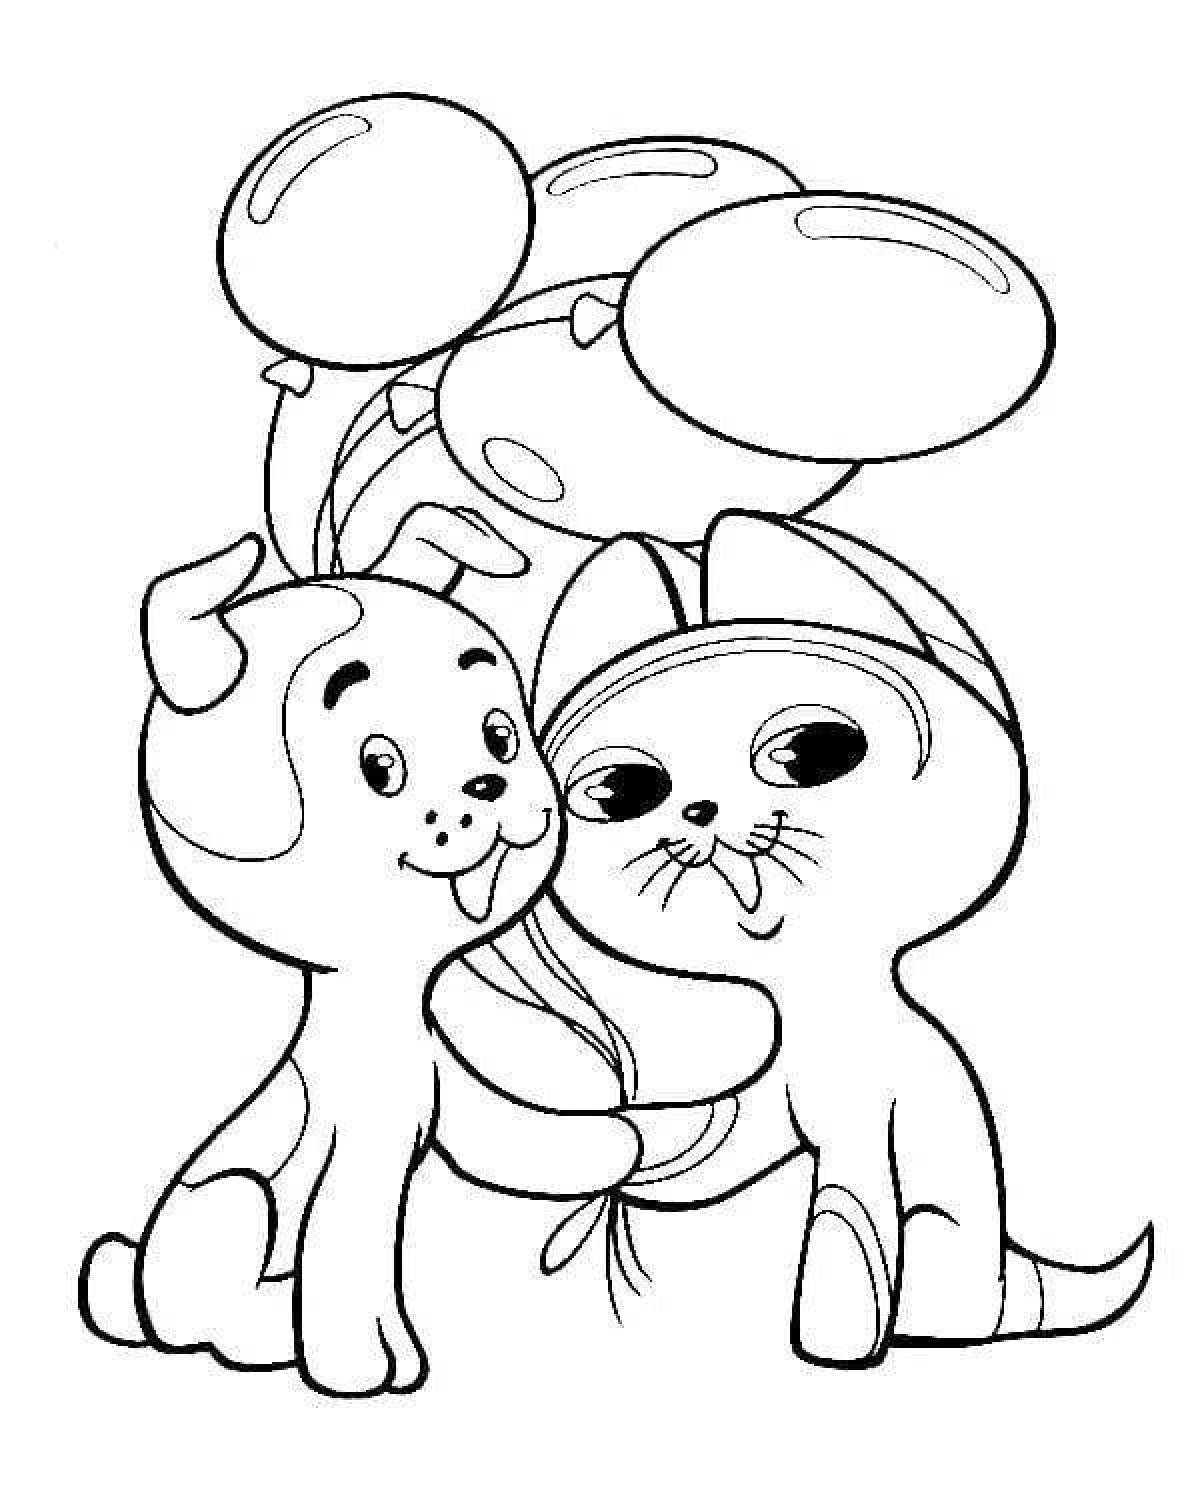 Coloring page stupid raccoon